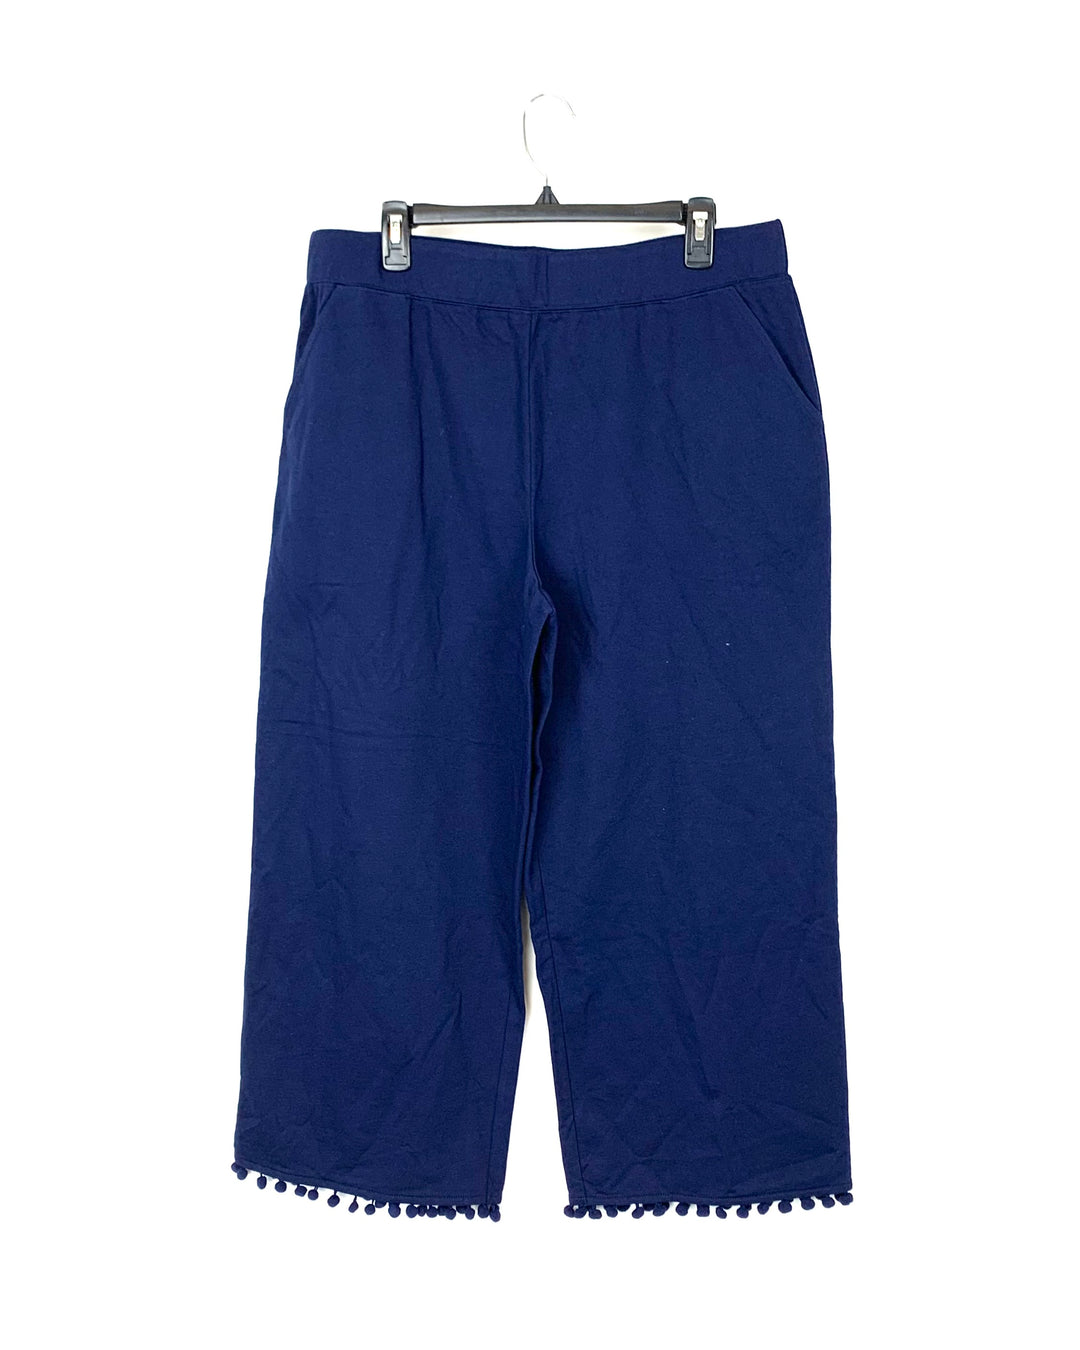 Navy Blue Cropped Pants With Pom Poms - Small and Large